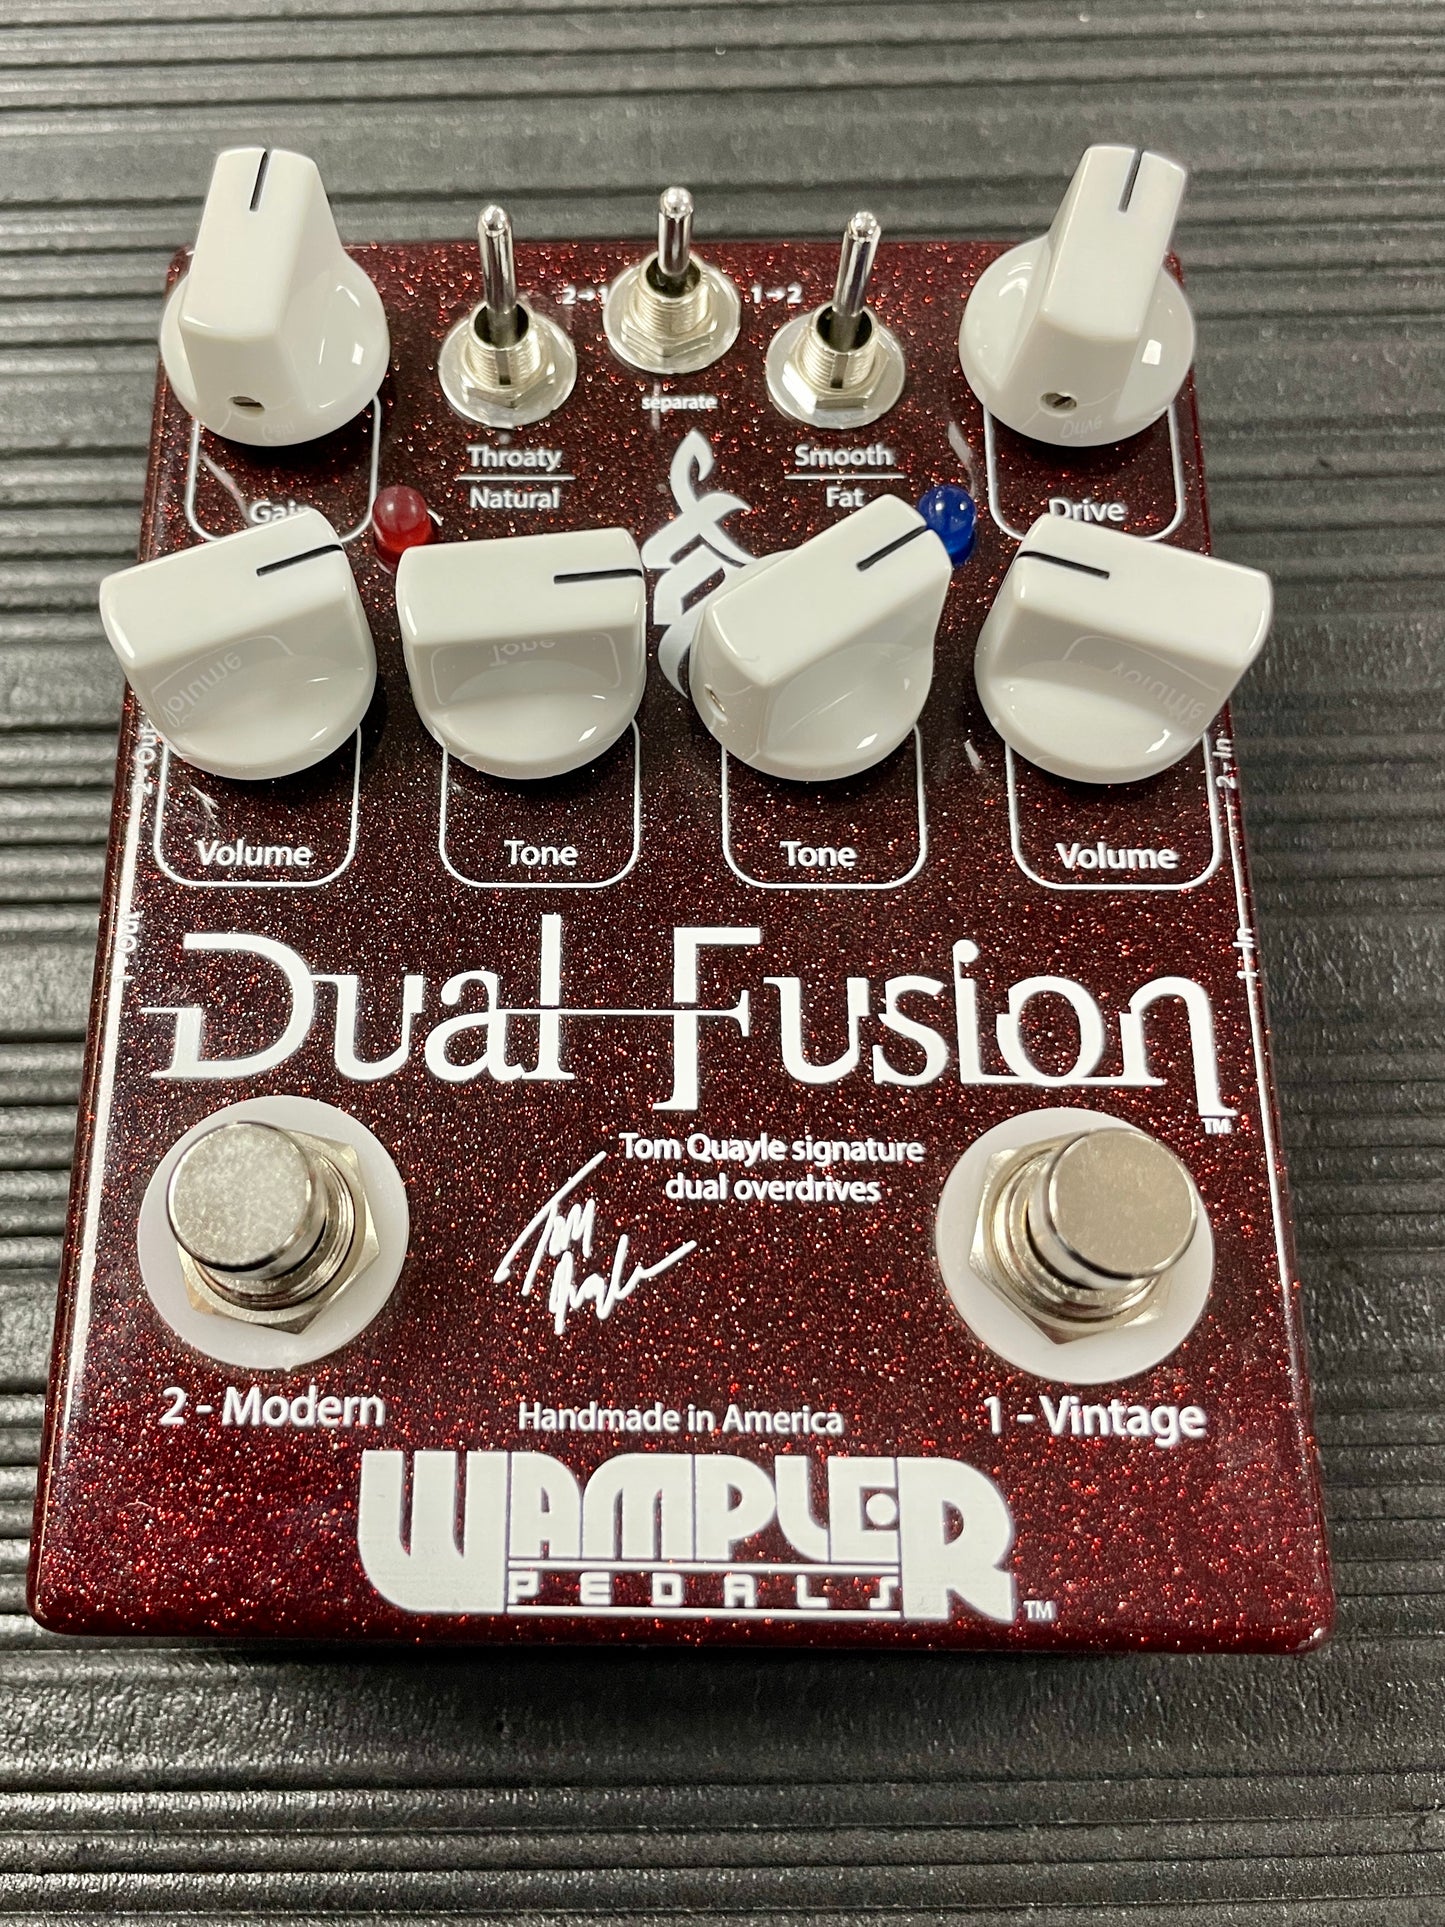 Used Wampler Dual Fusion Tom Quayle Overdrive Pedal w/Box TSS2895